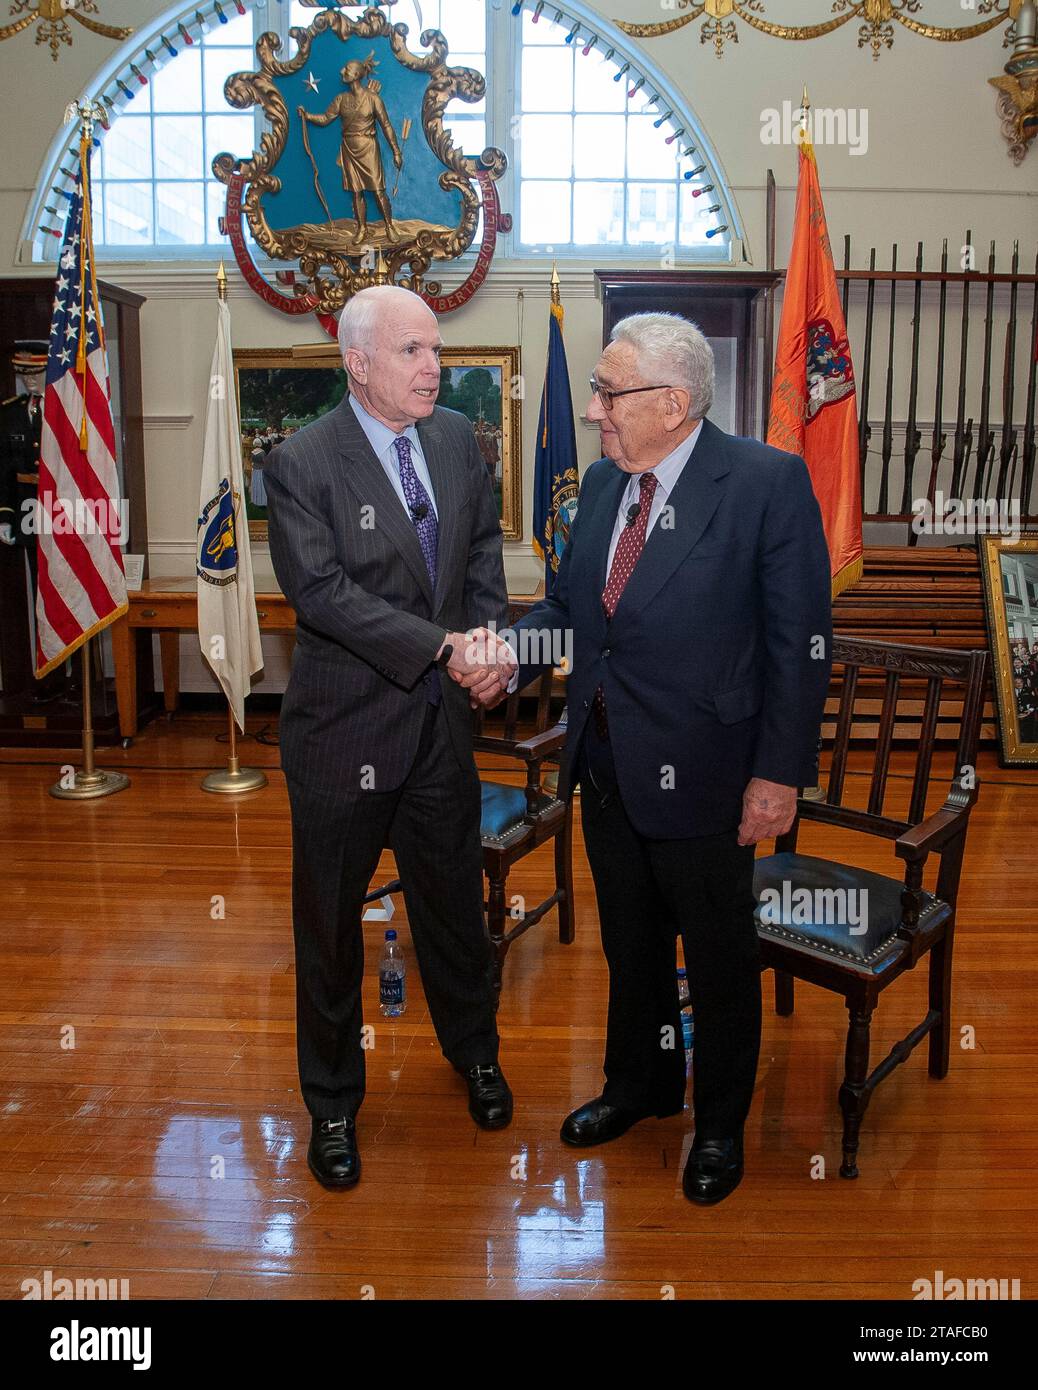 Boston, Massachusetts, USA  December 19 ,2007 Former Secretary of State and former National Security Advisor Dr. Henry A. Kissinger and Nobel Peace Prize recipient  with former Senator John McCain (R-AZ) at the Ancient and Honorable Artillery Company Armory Faneuil Hall in Boston on December 19, 2007.  Kissinger passed on November 29, 2023 at age 11 at his Connecticut home.  (Rick Friedman ) Stock Photo